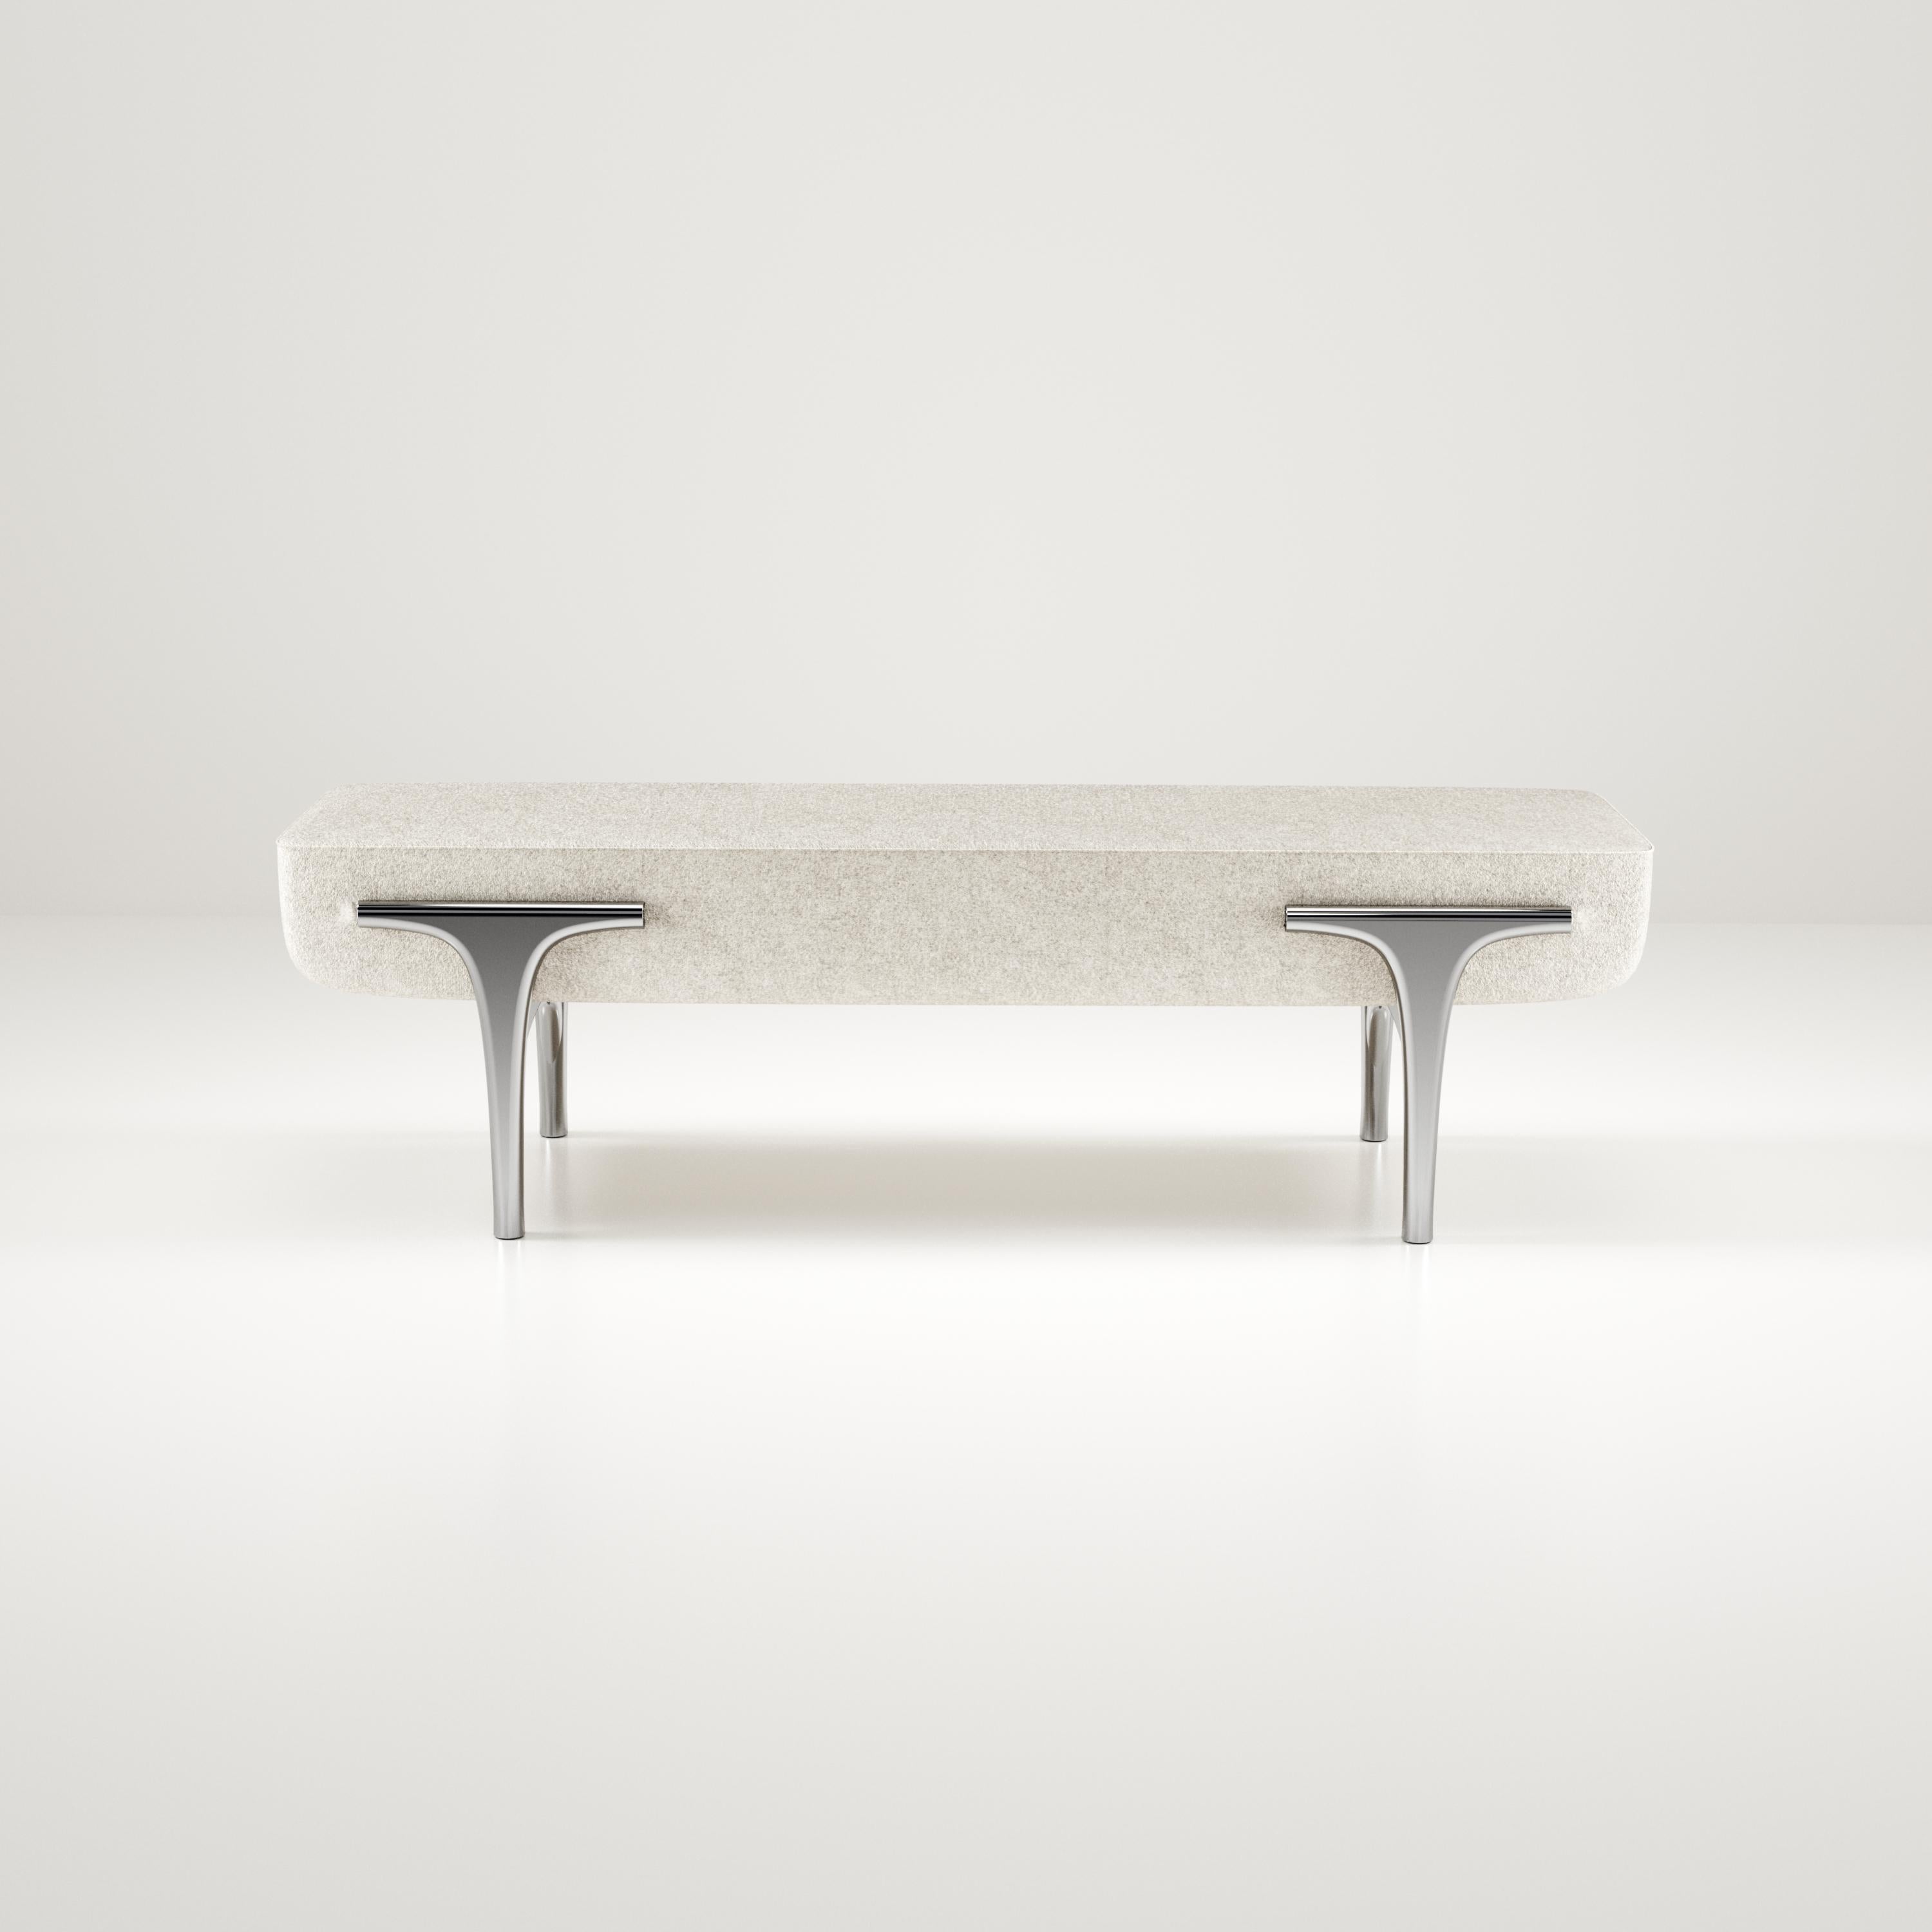 The Ramo bench by R & Y Augousti is an elegant and versatile piece. The upholstered piece provides comfort while retaining a unique aesthetic with the chrome finish polished stainless steel frame and details. This listing is priced for COM supply by